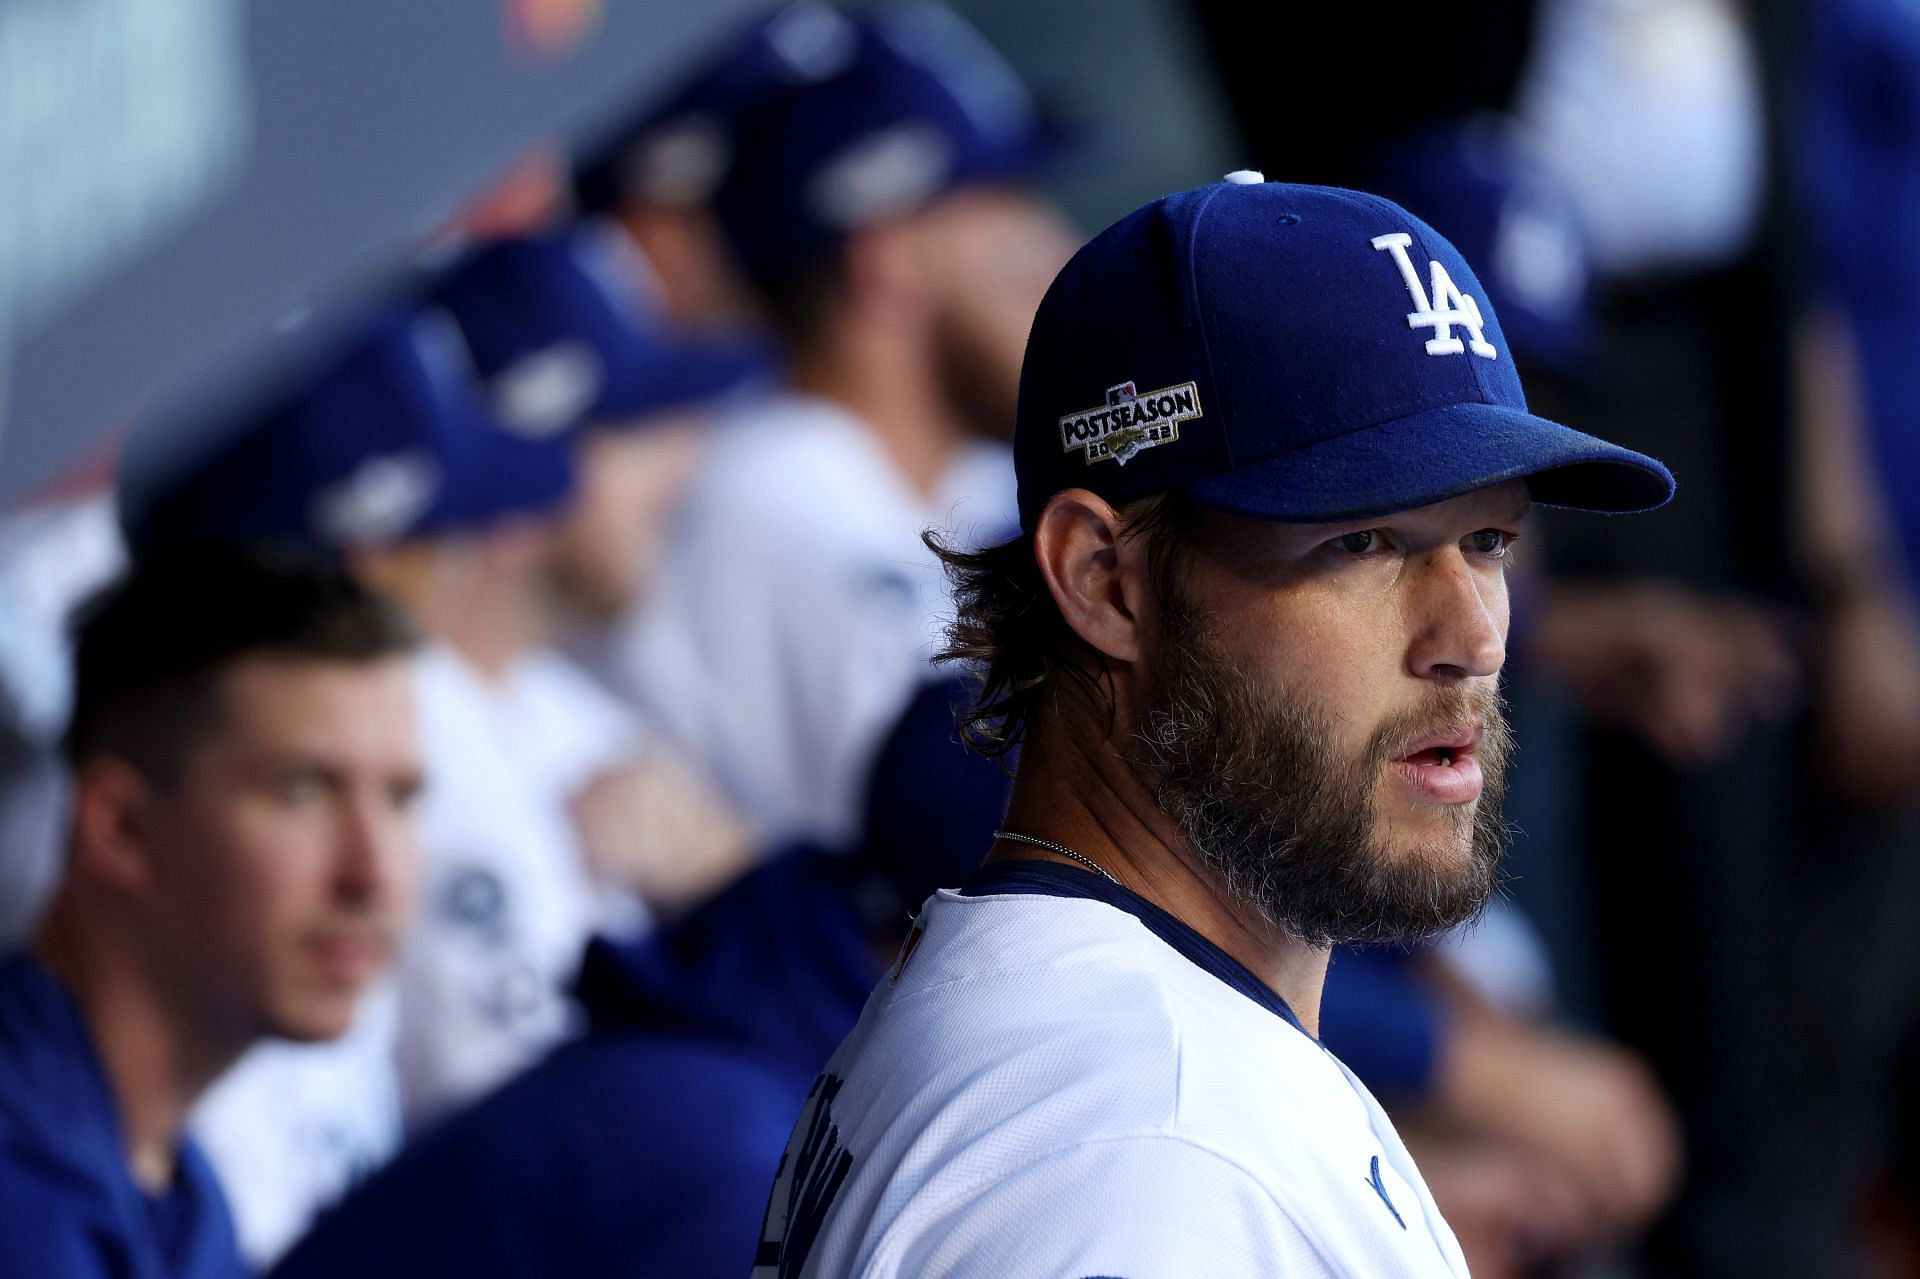 Clayton Kershaw Continues To Shine - Dodger